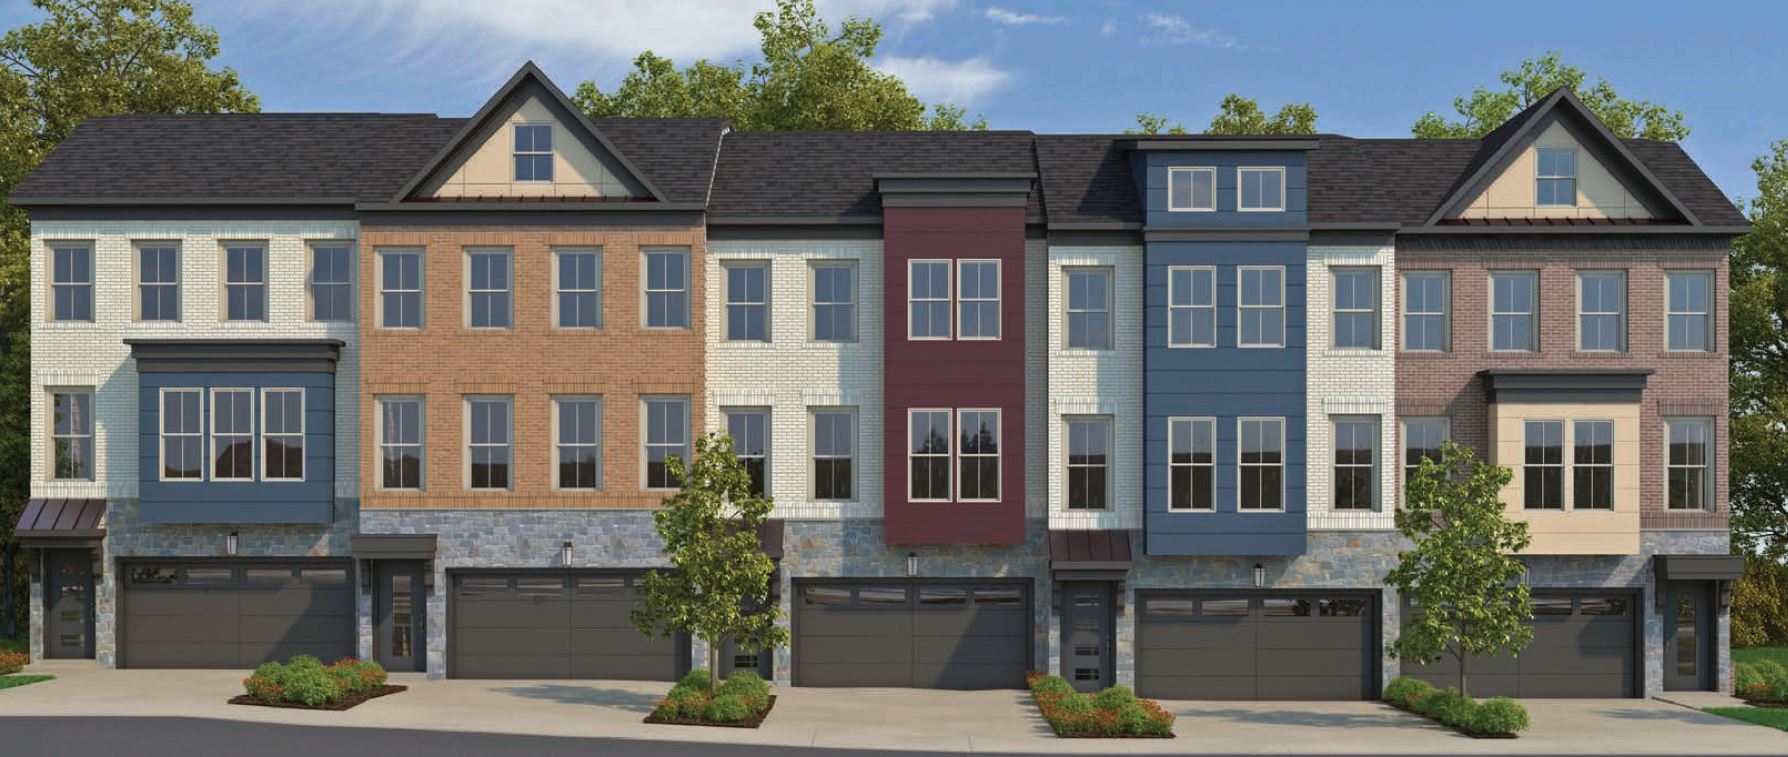 Mateny Hill, Germantown, Maryland, New Townhouse Community